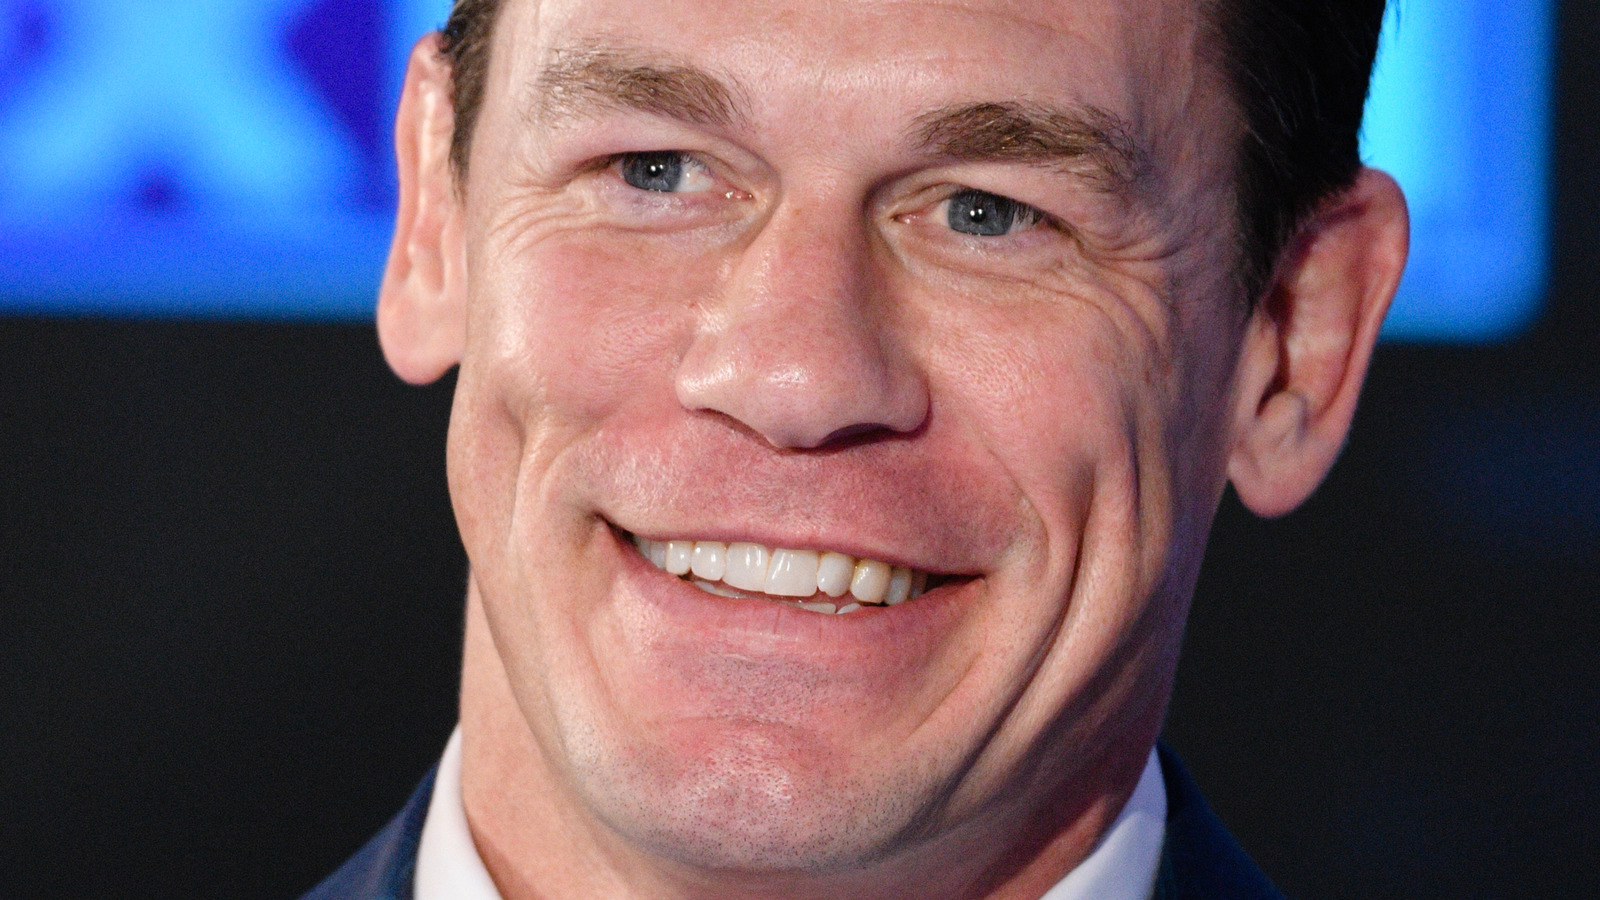 John Cena Just Set The Most Heartwarming Record Of All Time